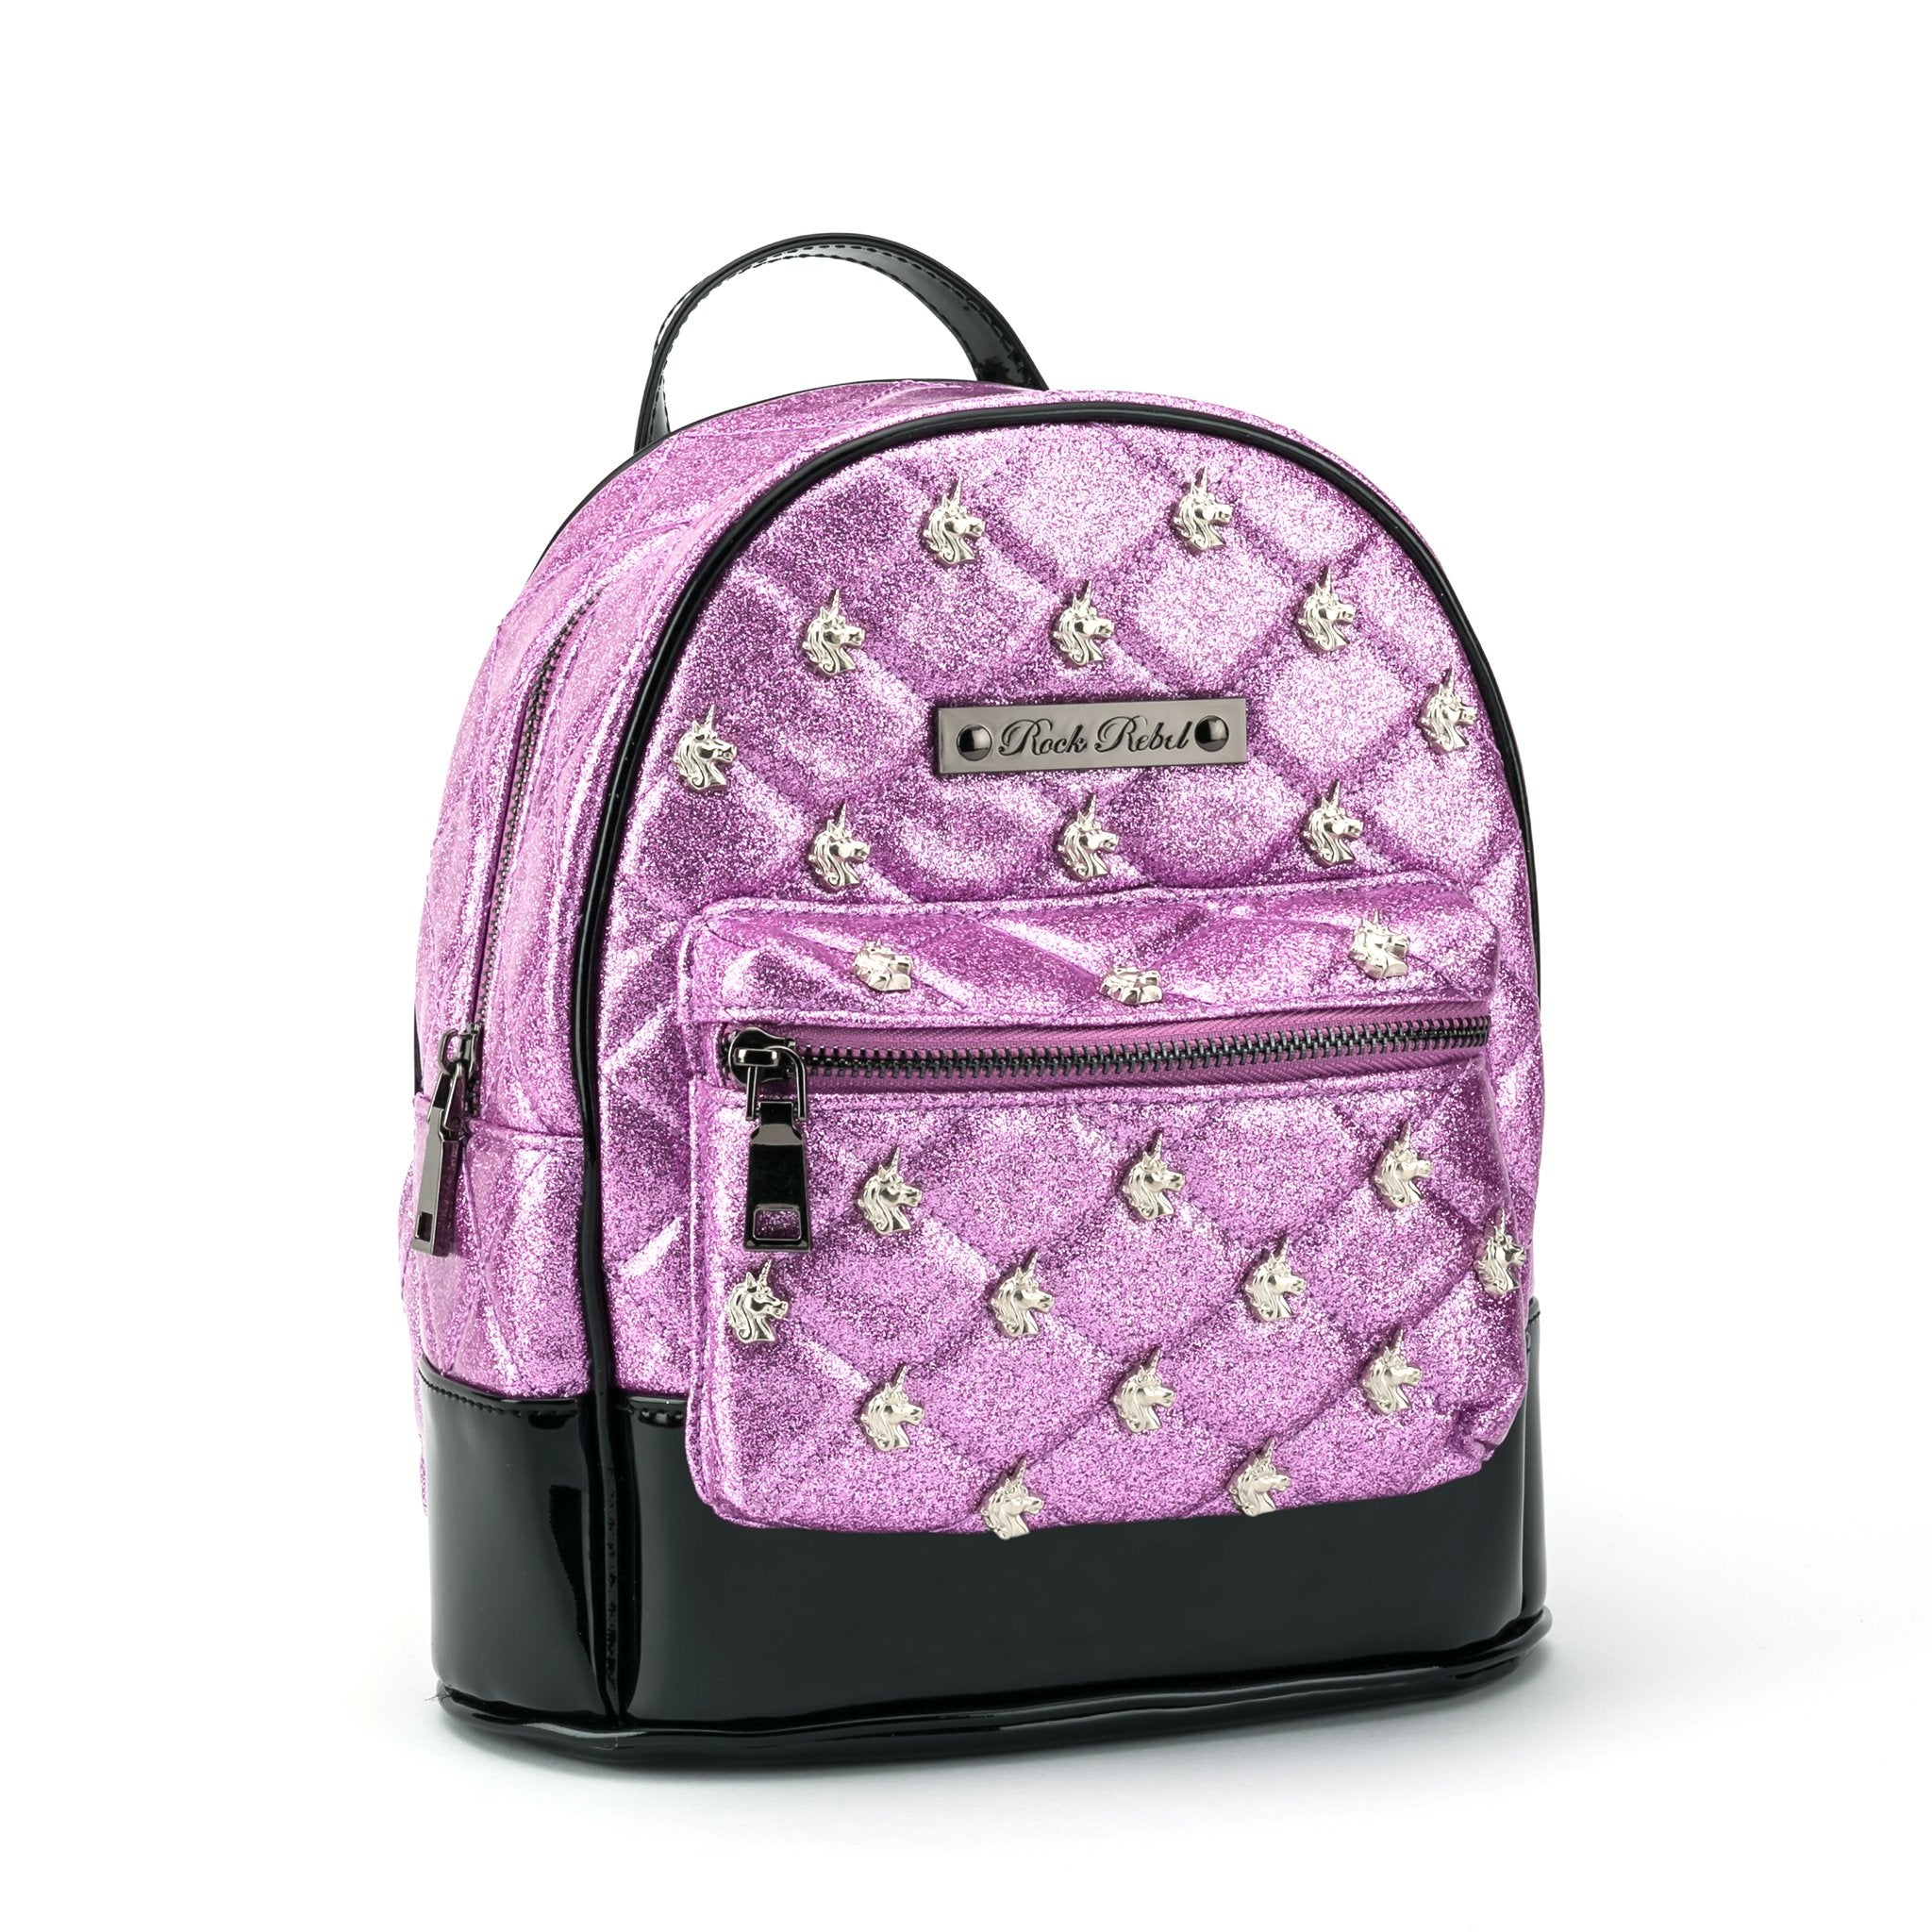 Unicorn Quilted & Studded Pink Glitter Mini Backpack